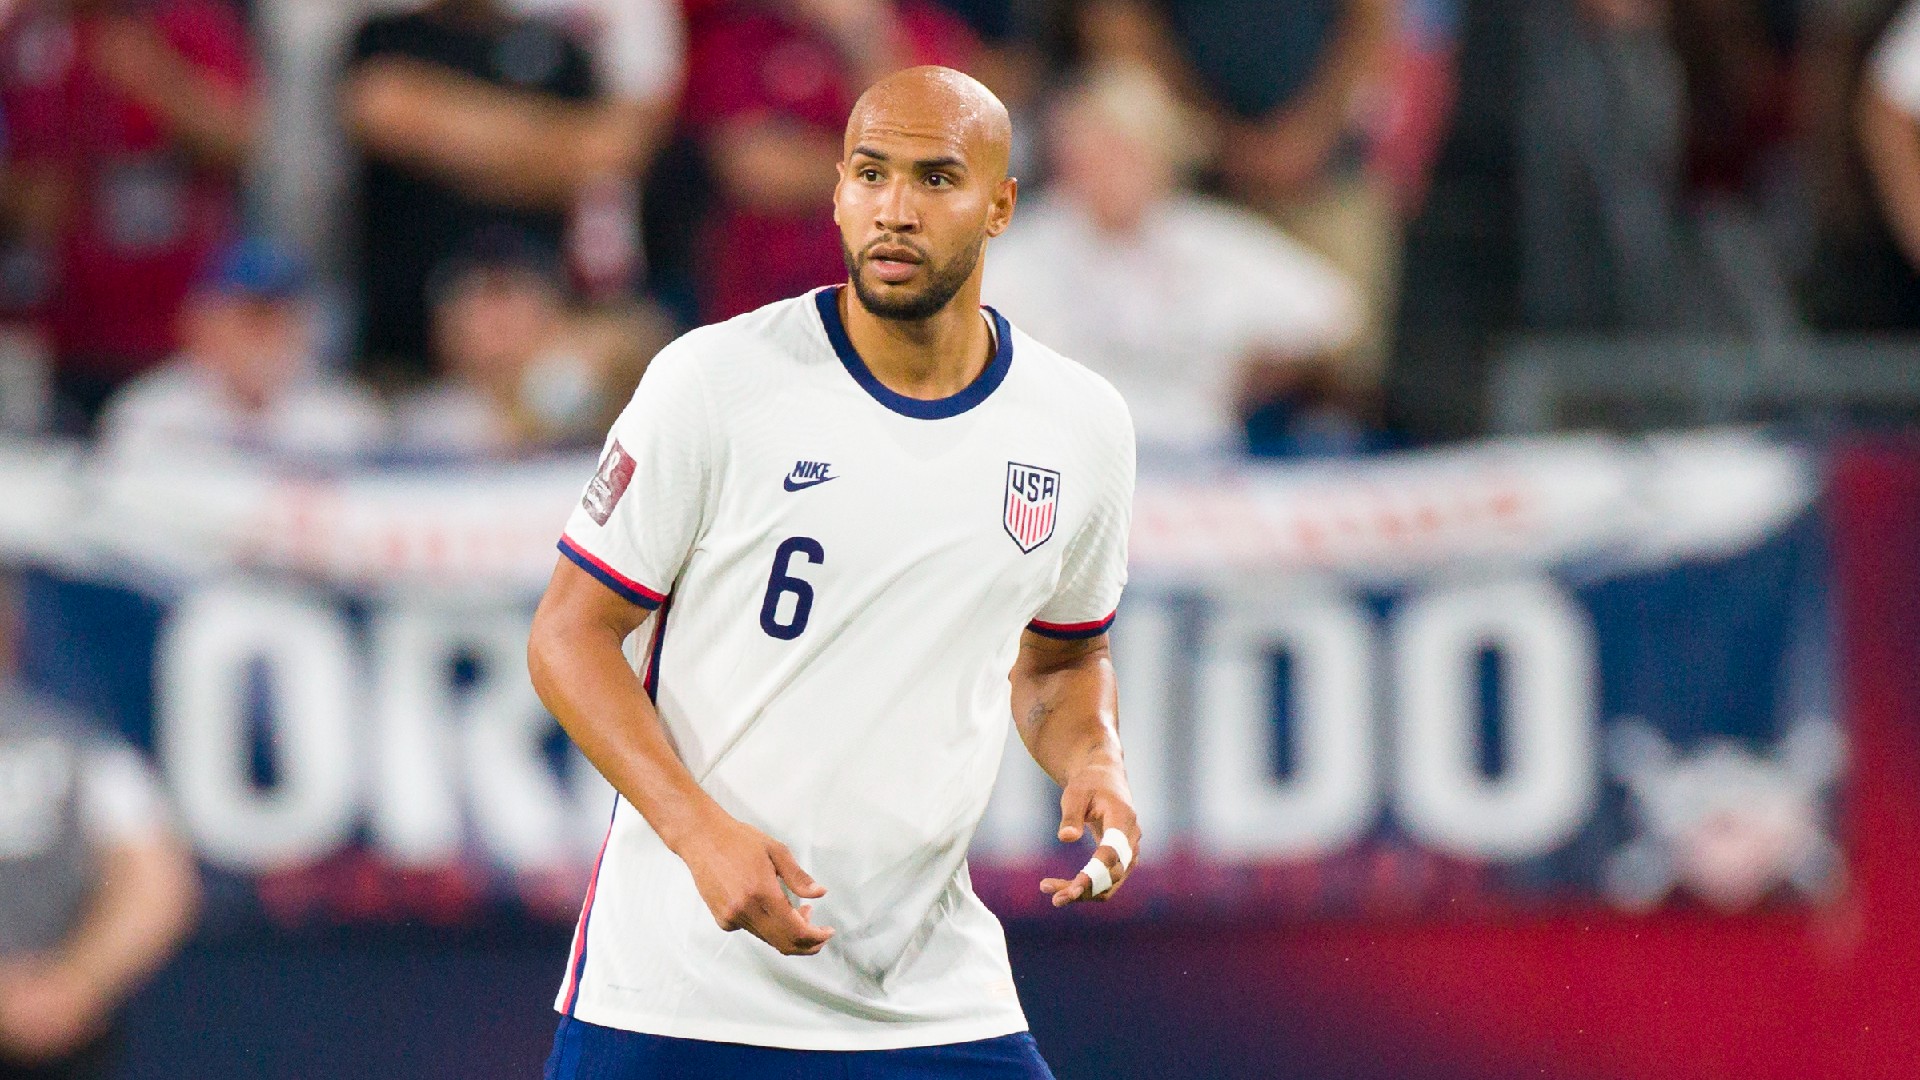 ‘The decision isn’t surprising’ – Brooks admits performances haven’t been good enough following USMNT exclusion